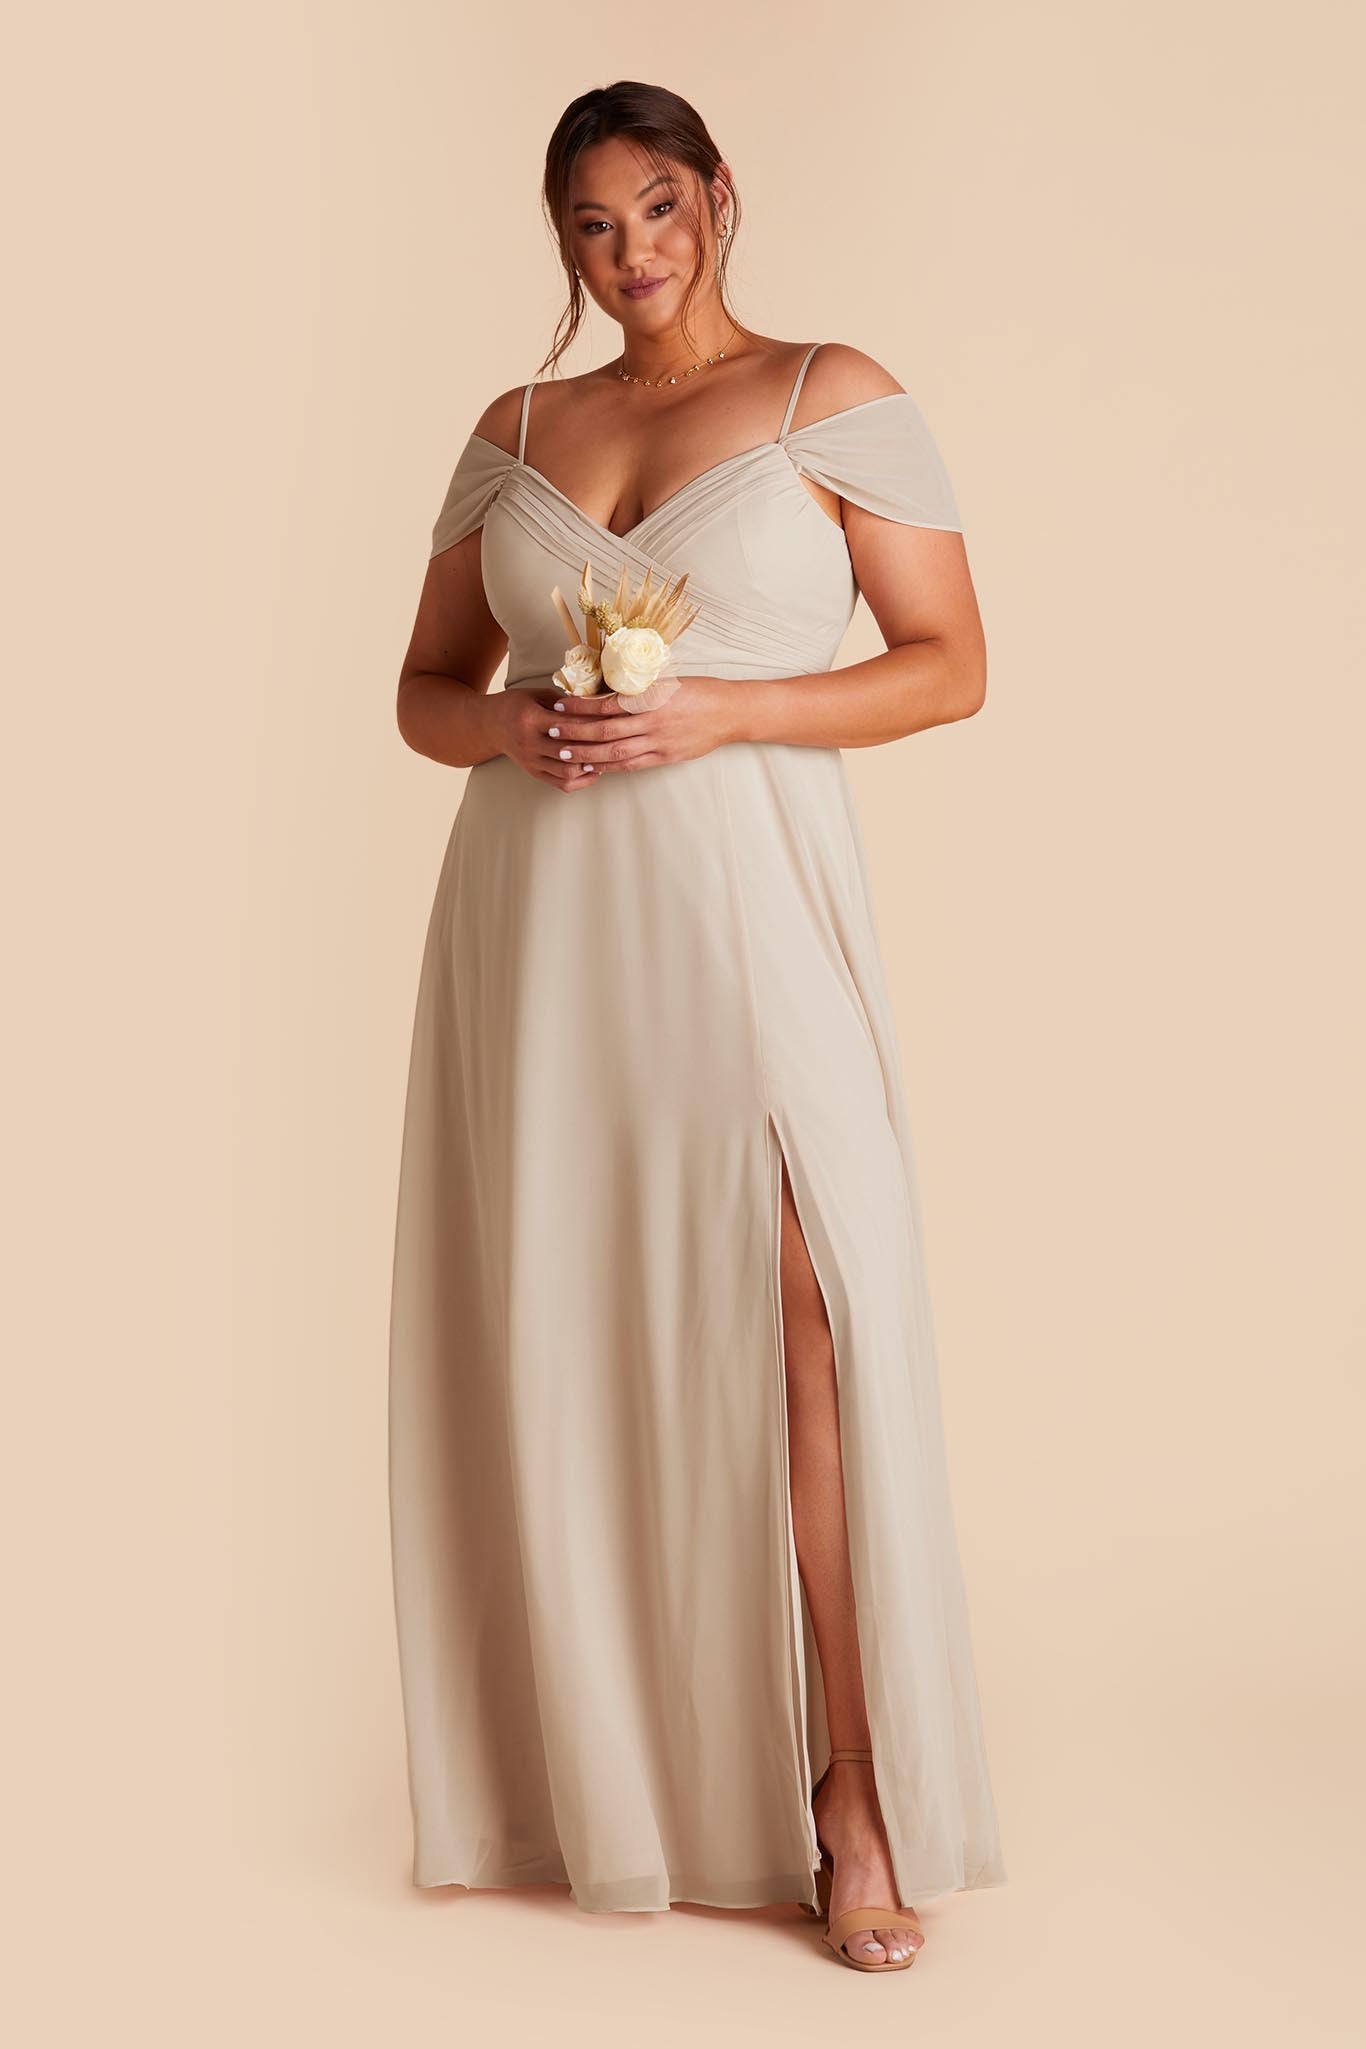 Neutral Champagne Spence Convertible Dress by Birdy Grey